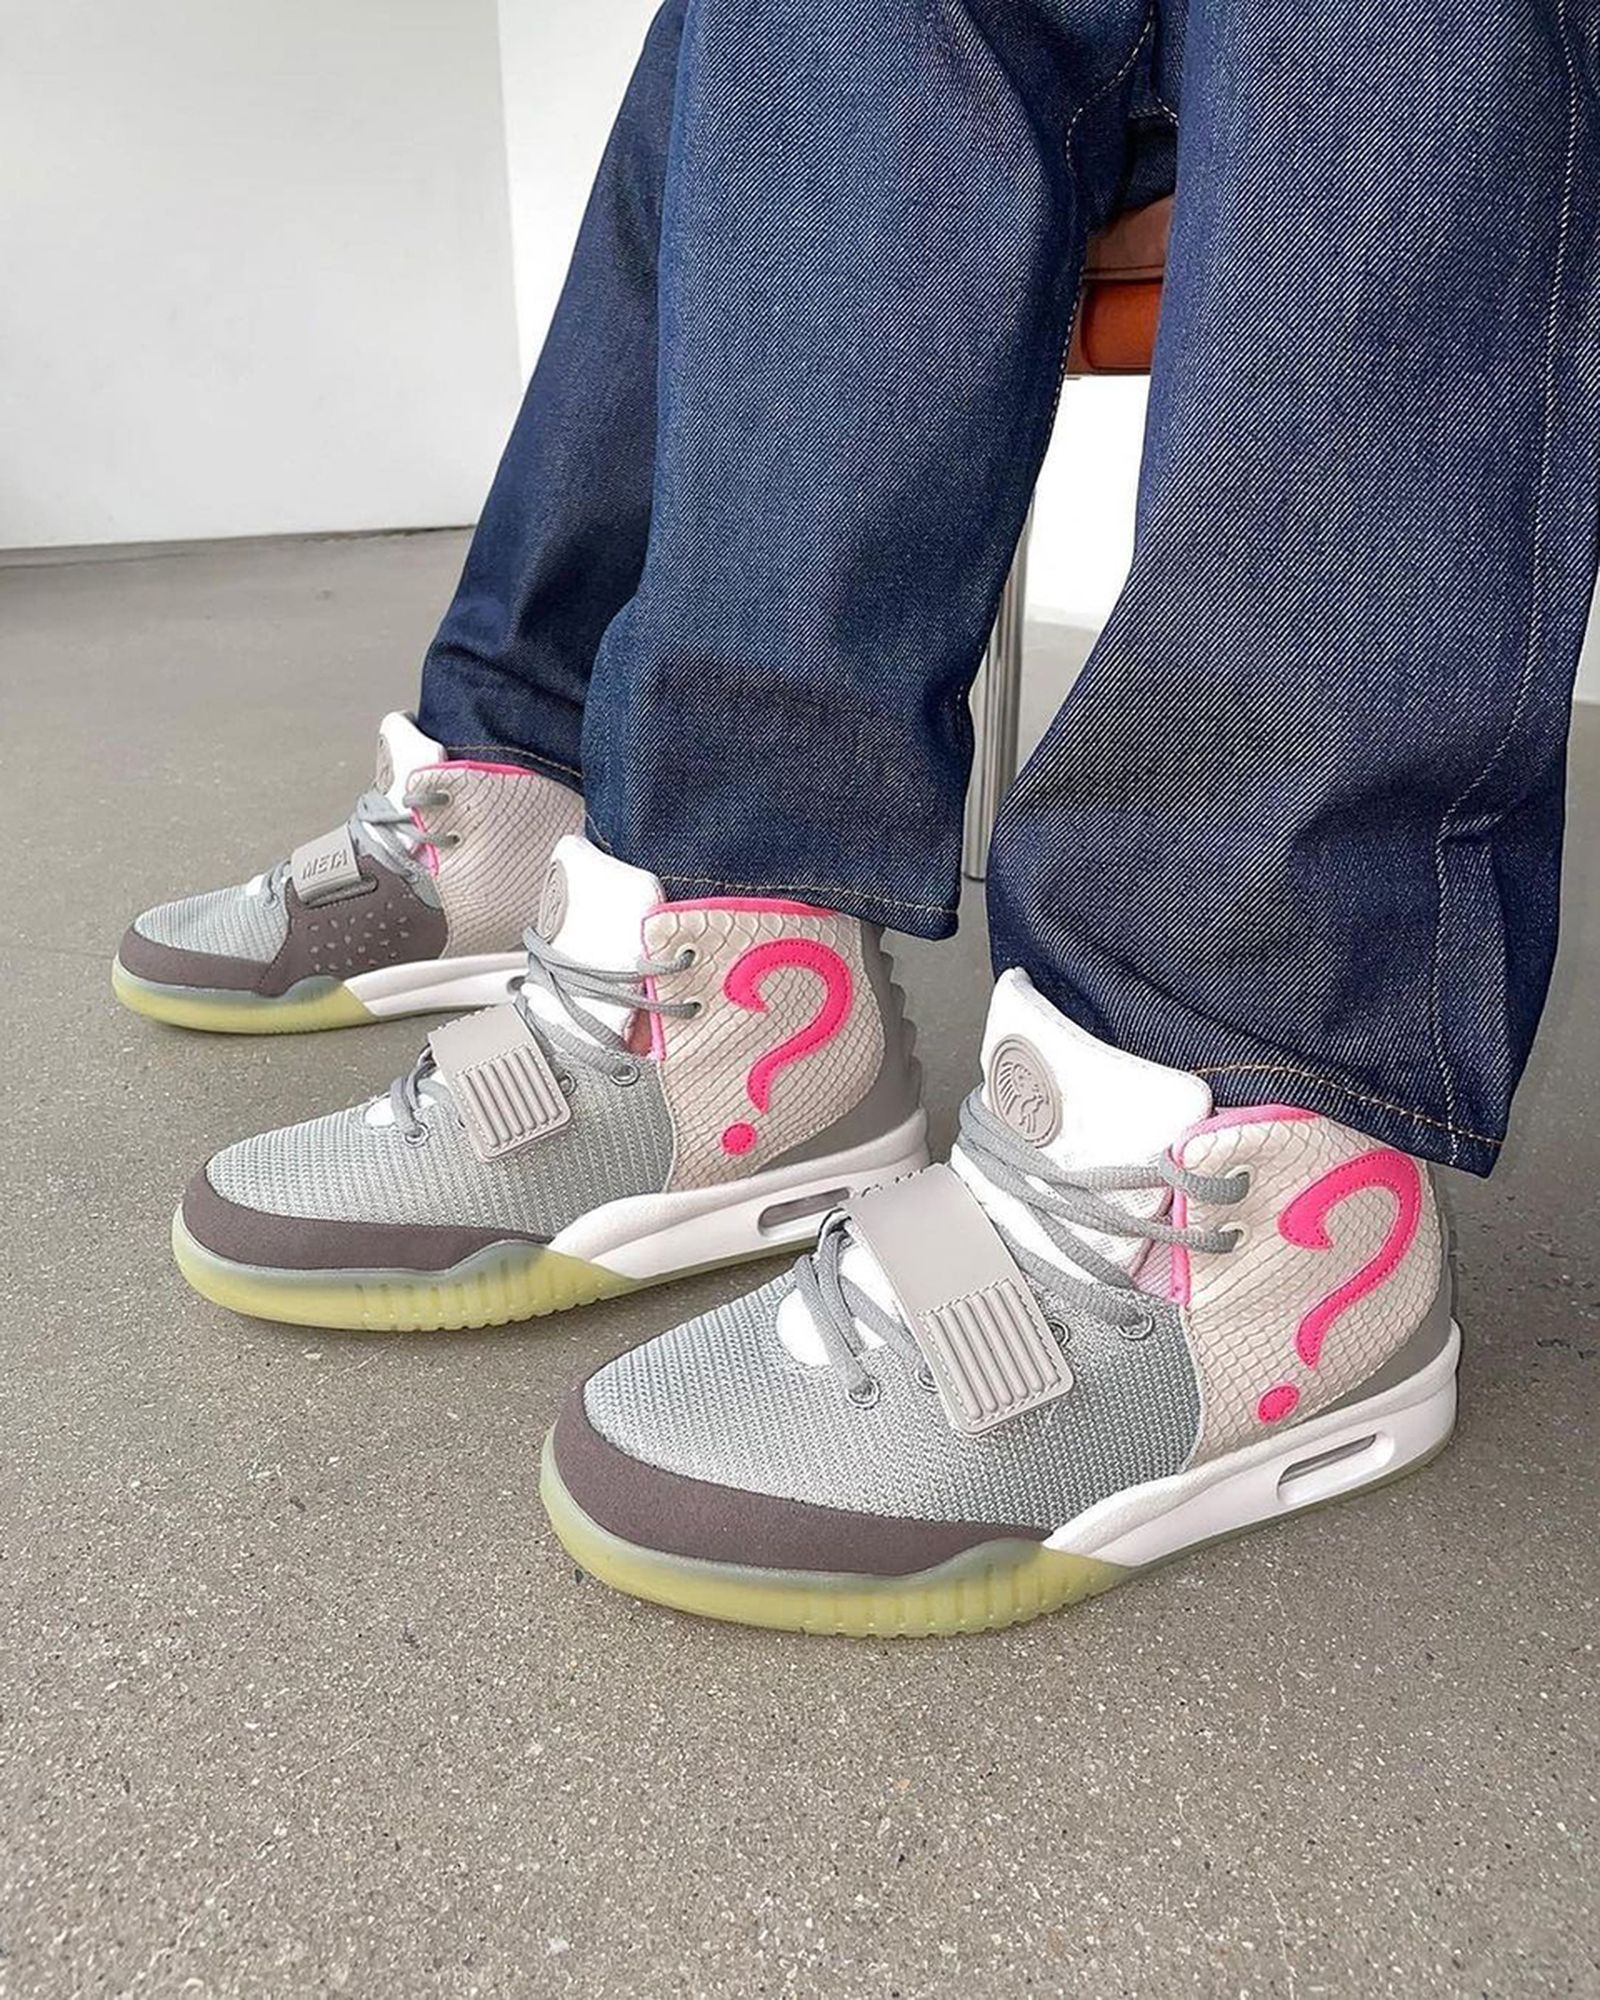 air-yeezy-bootleg-sneakers-father-llc (2)